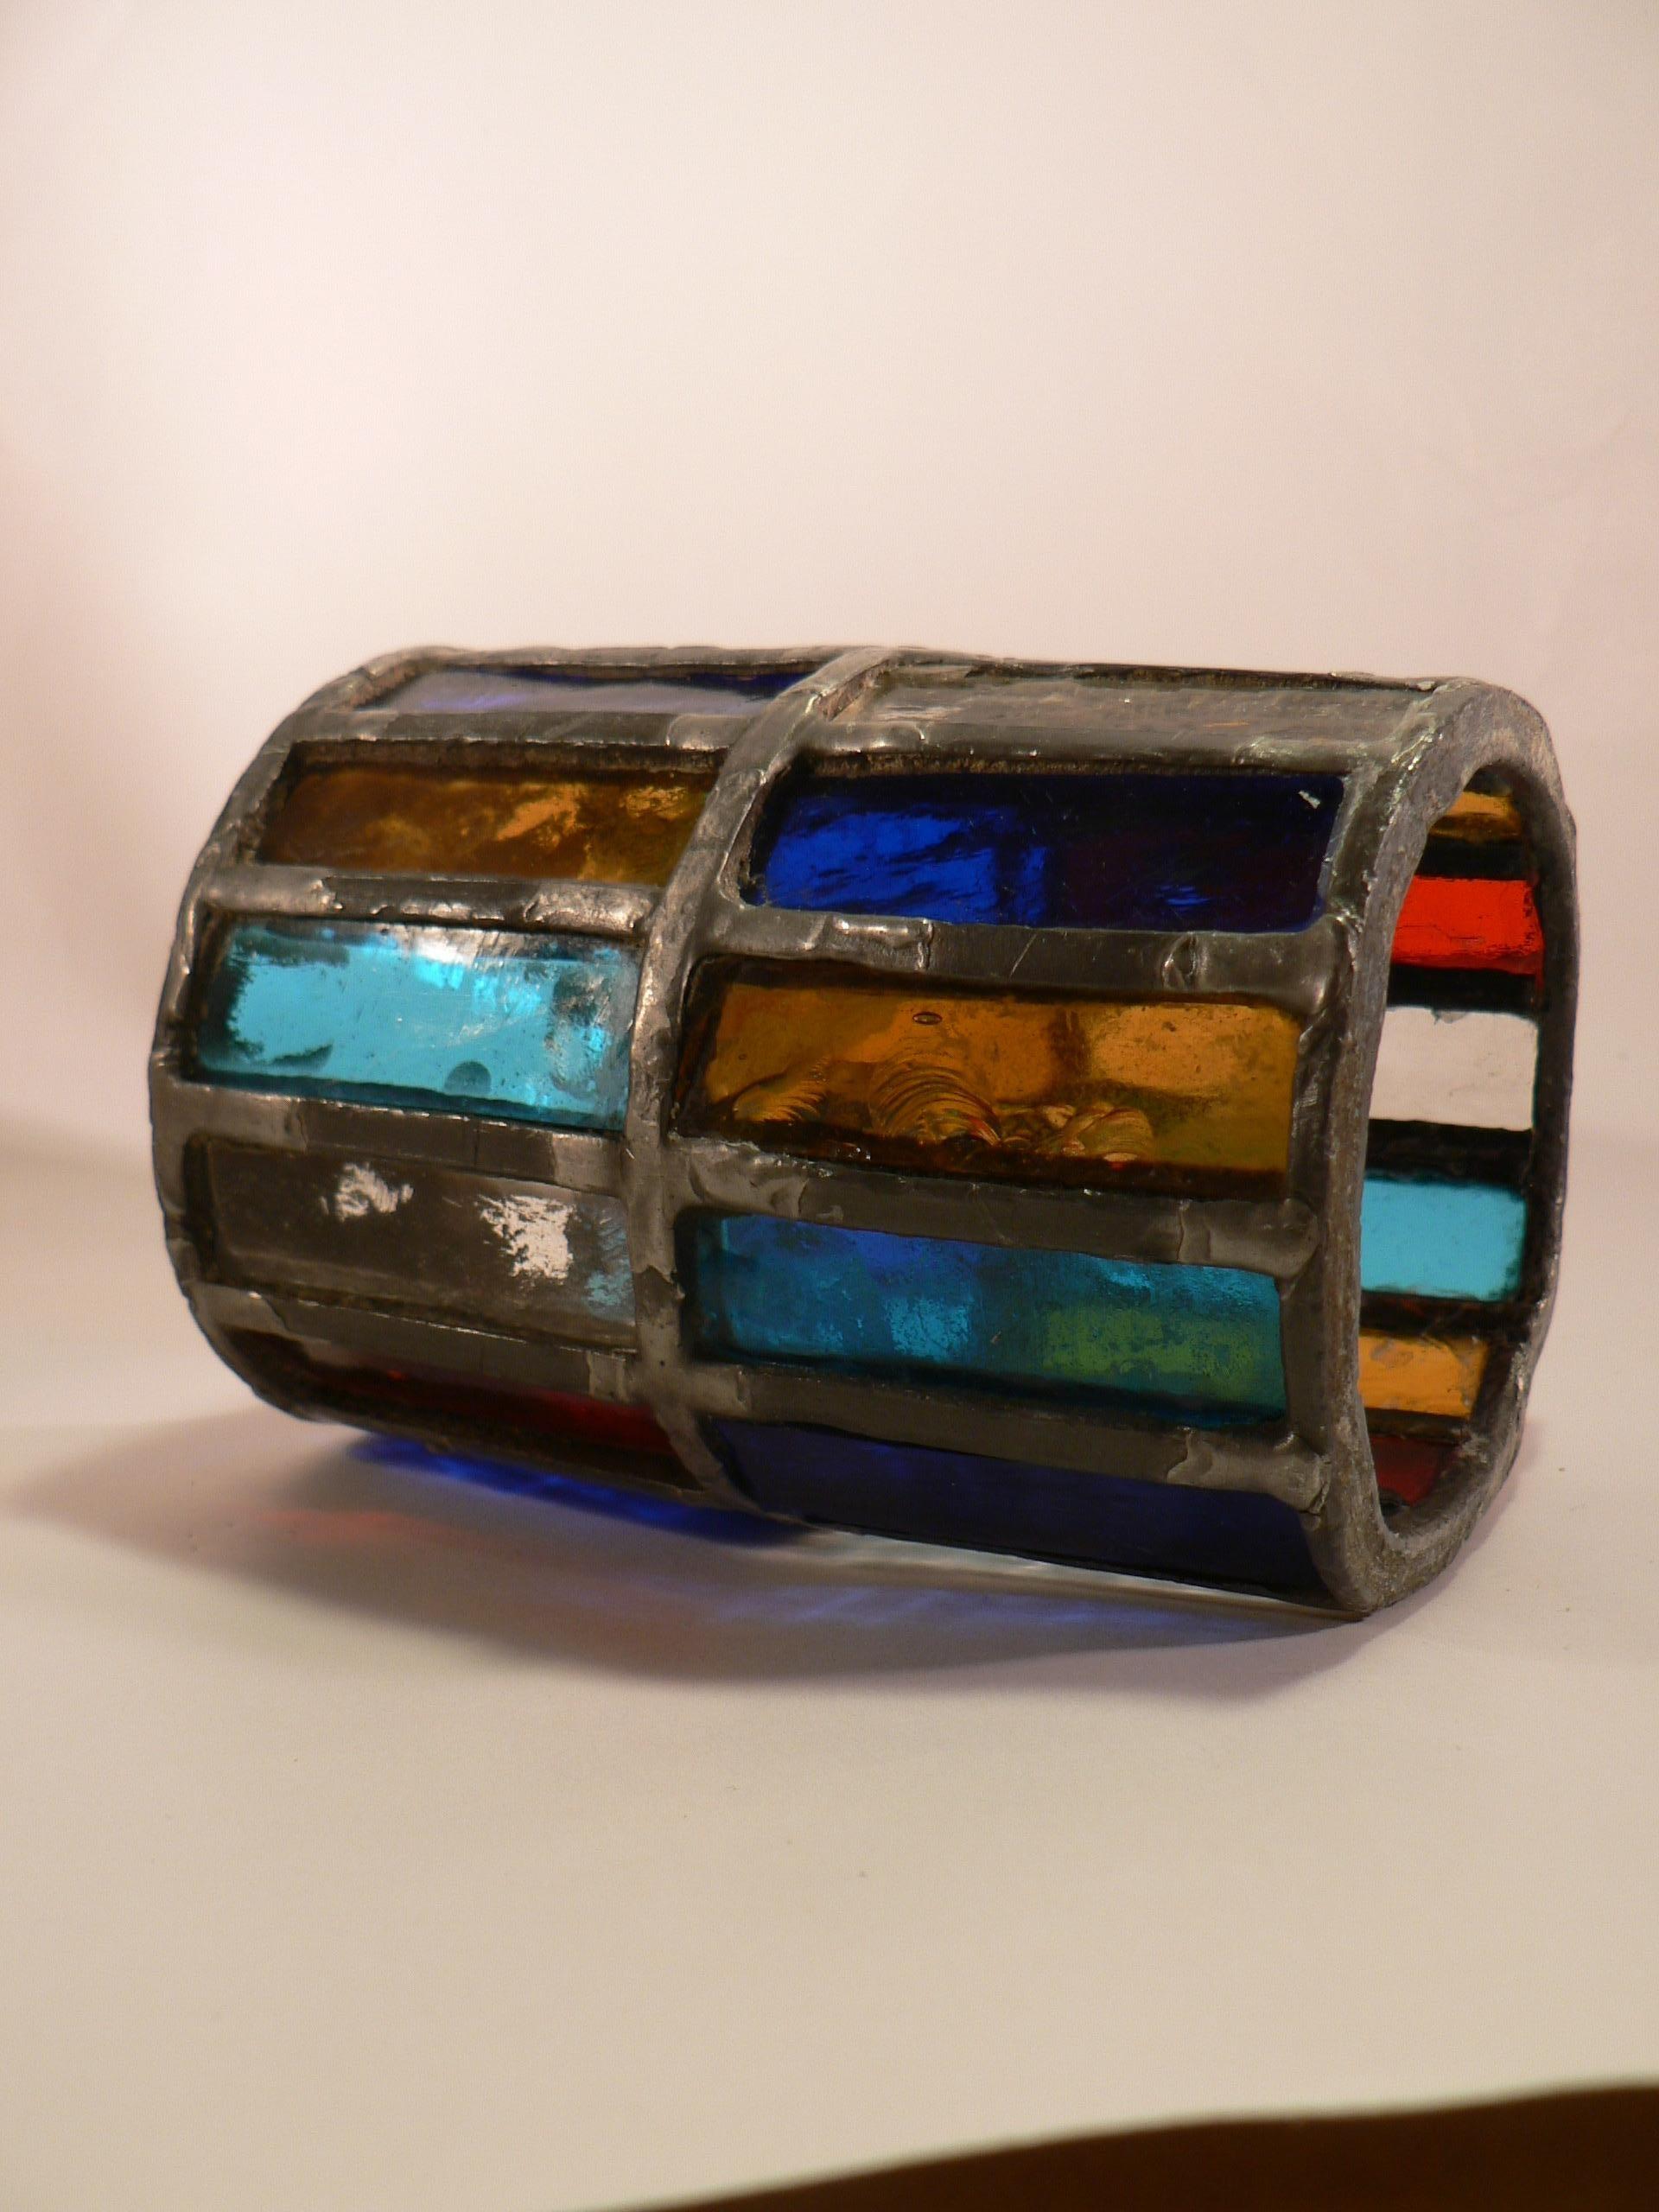 A 1960s french lantern, multicolored blown glass and pewter, constructed using stained glass techniques.

